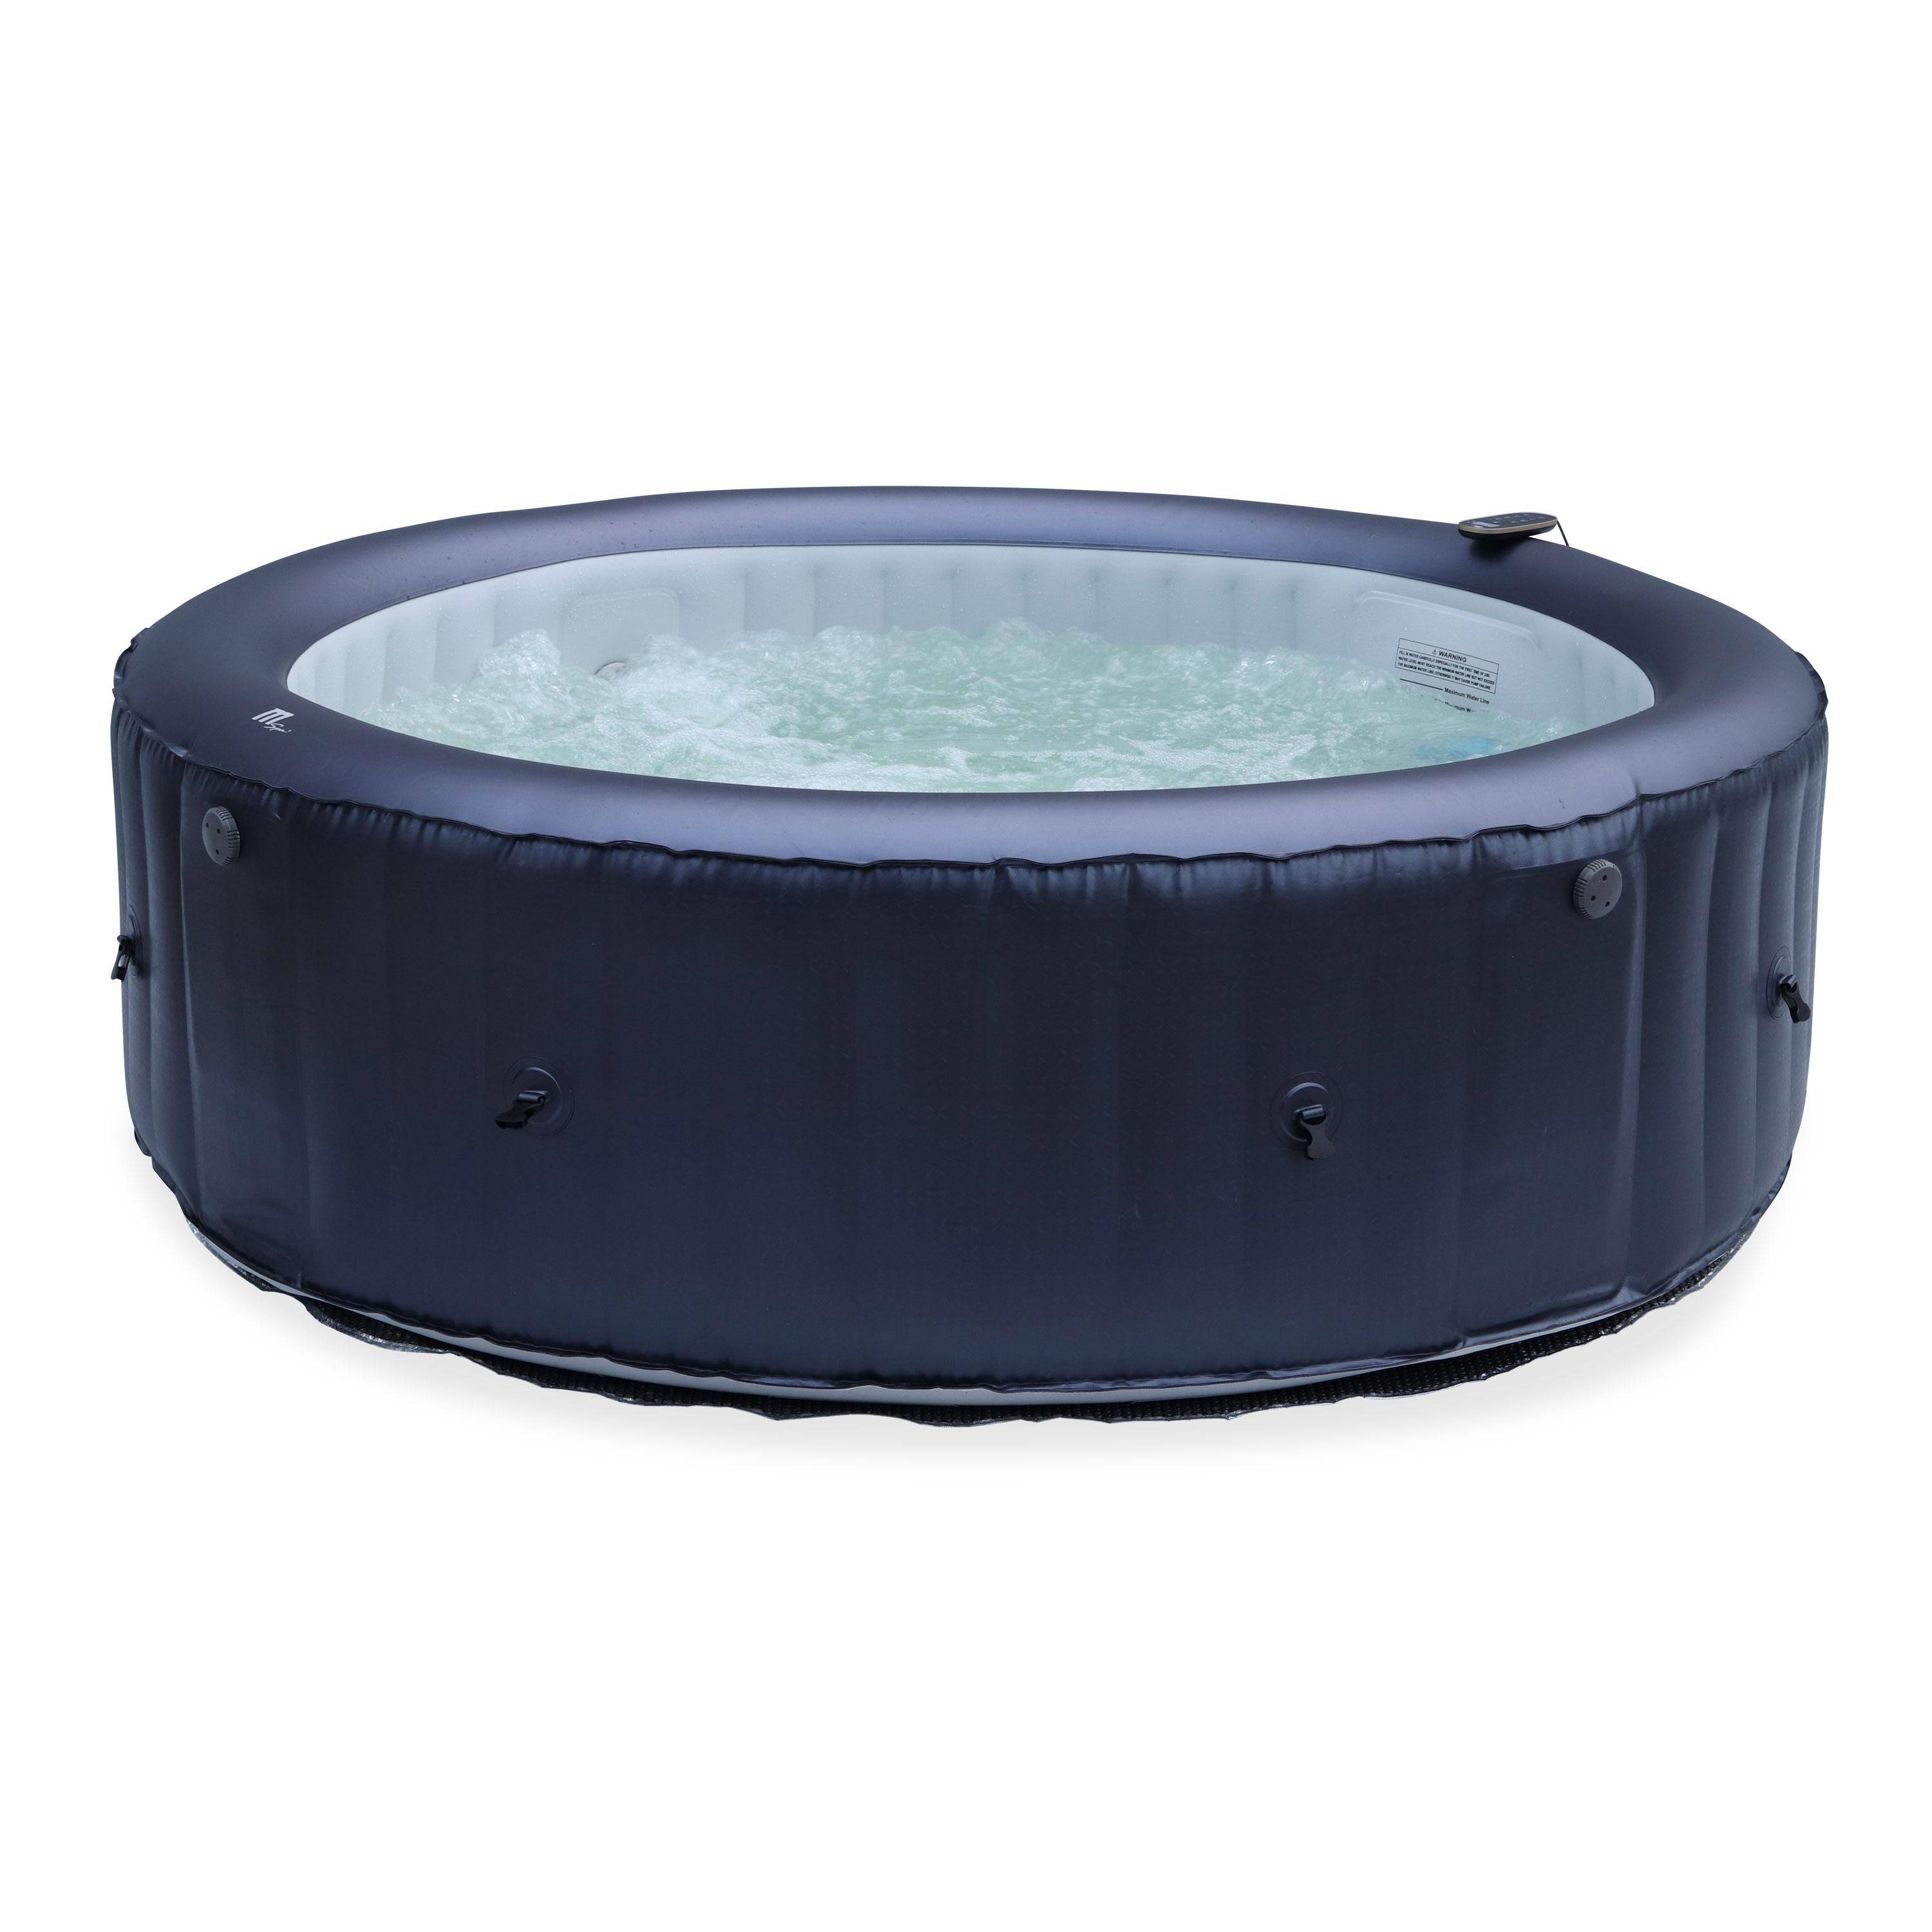  6-person premium round inflatable hot tub MSpa - Ø205cm round 6-person spa, PVC, pump, heating, inflation hose, massage hydrojets, 2 filter cartridges, lid and remote control - Carlton 6 - Blue,sweeek,Photo1